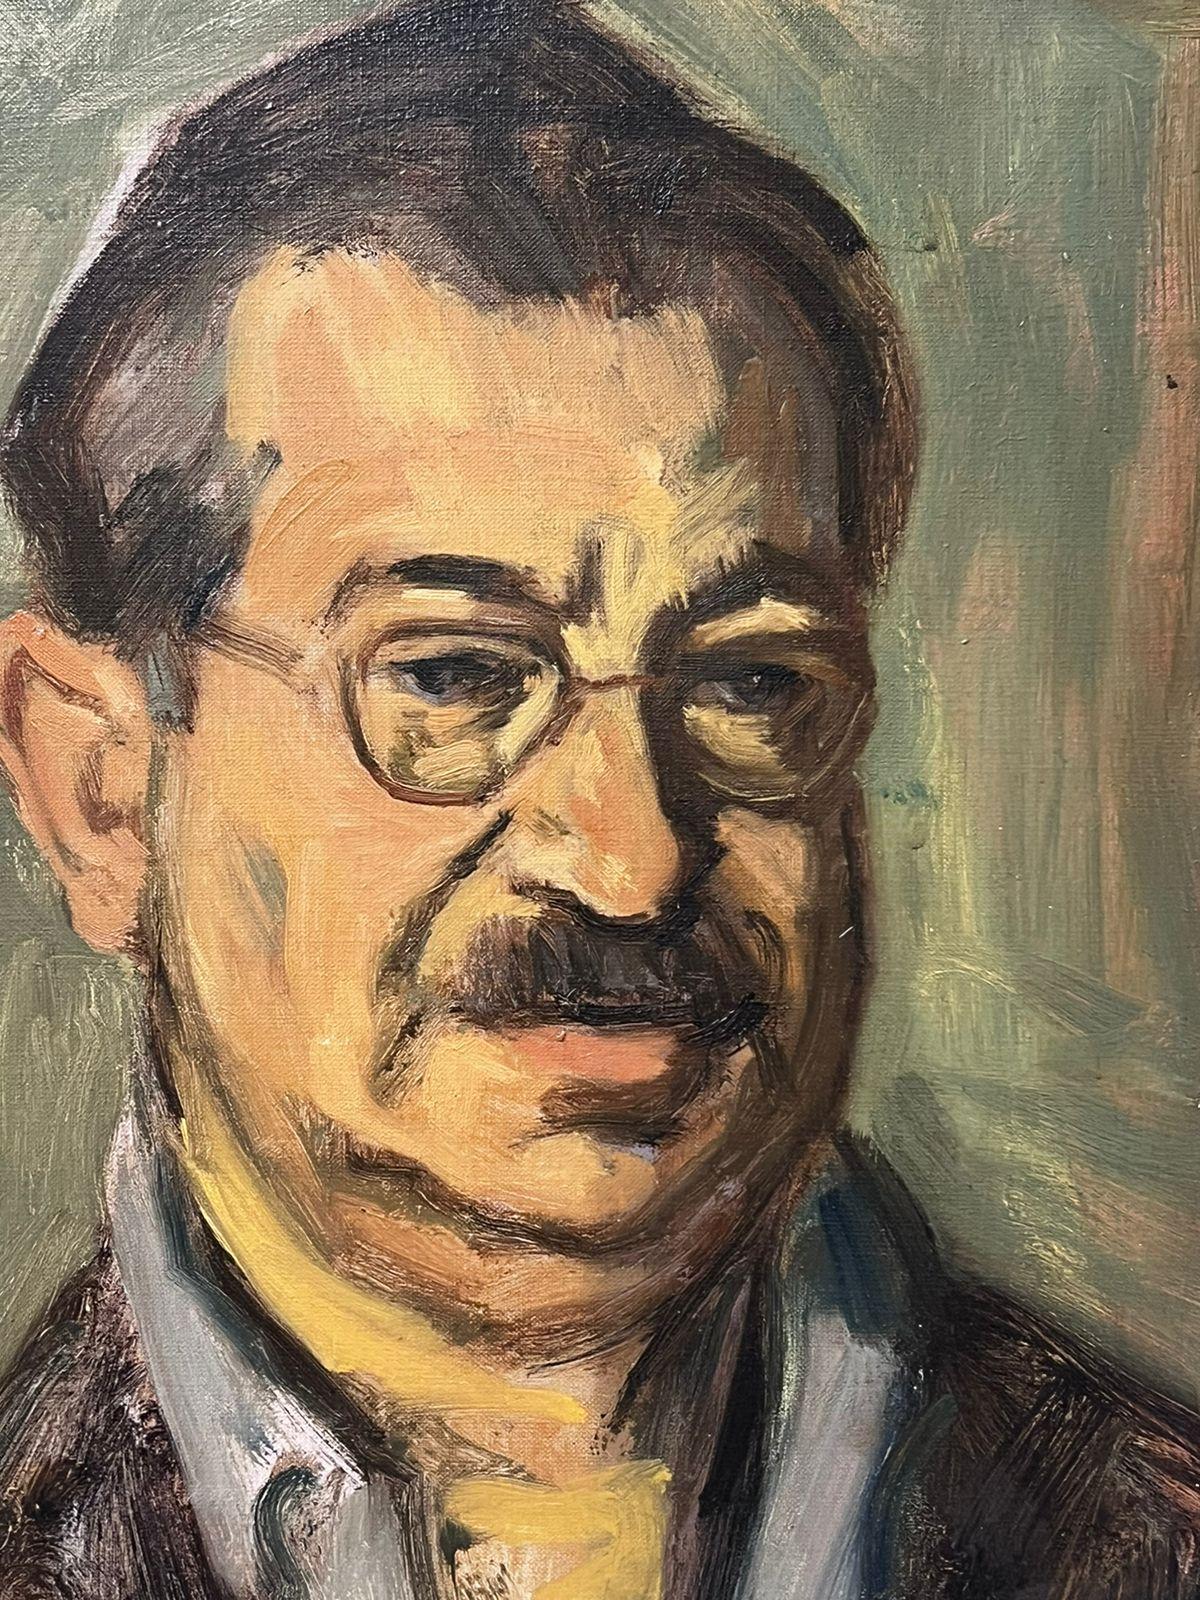 20th Century Portrait of man with Glasses by listed Polish Artist Oil on Canvas - Painting by Jacob Markiel